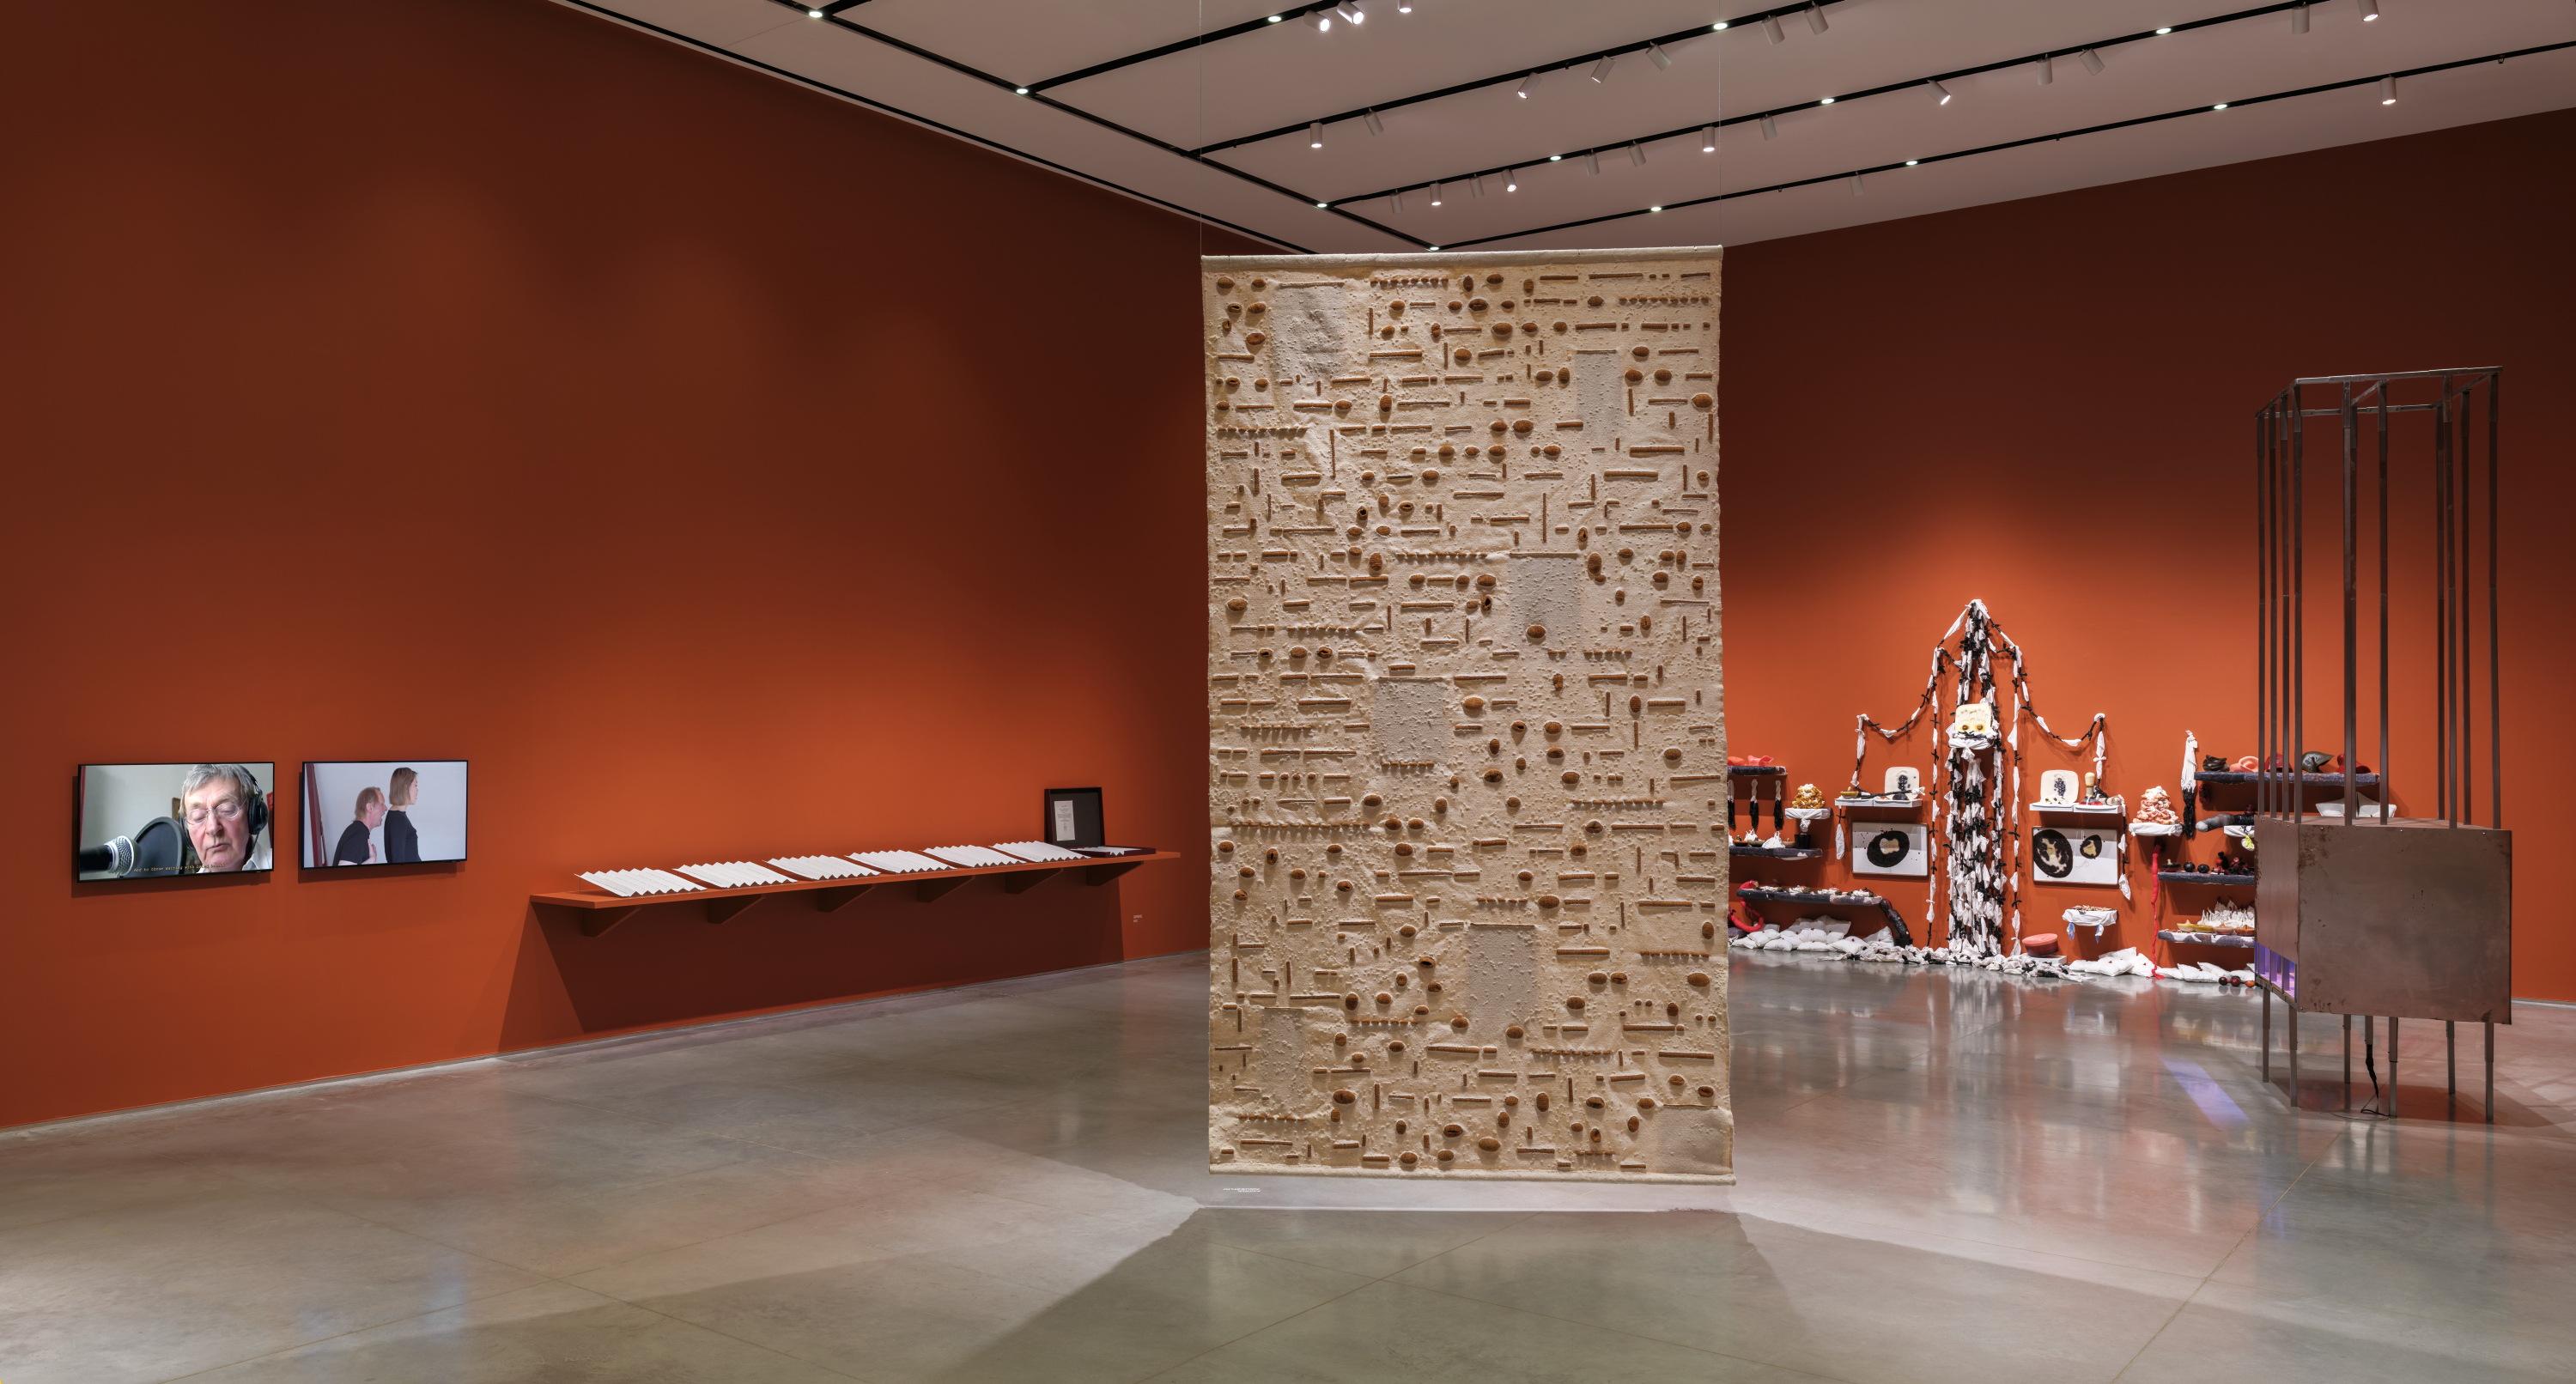 Gallery interior with terracotta-red walls and a gray floor. There are artworks installed on the wall, two tv monitors, a suspended tapestry, and a free-standing cage sculpture.